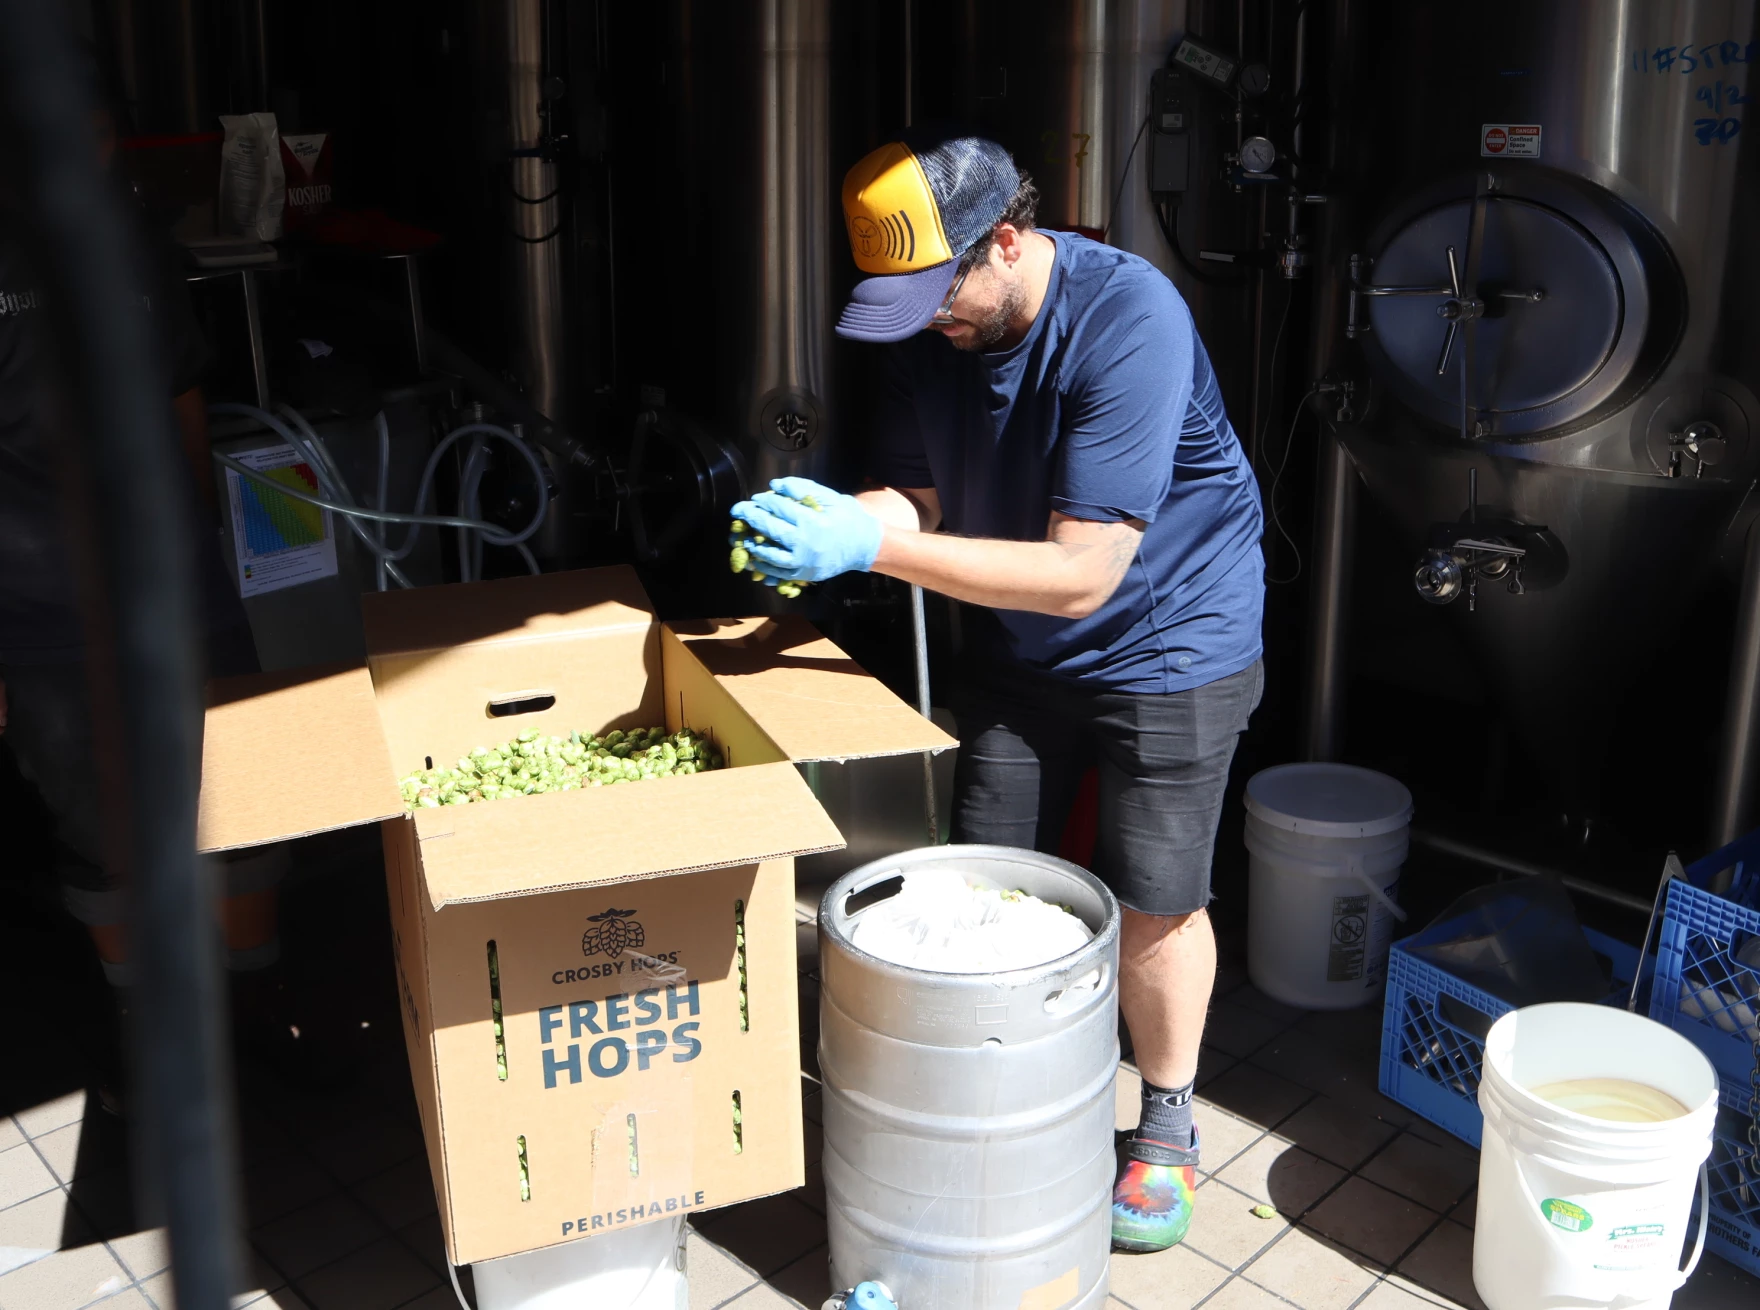 Three Magnets head brewer Aaron Blonden begins brewing a batch of fresh-hop beer with hops that were plucked from the vine mere hours earlier on September 7, 2022.